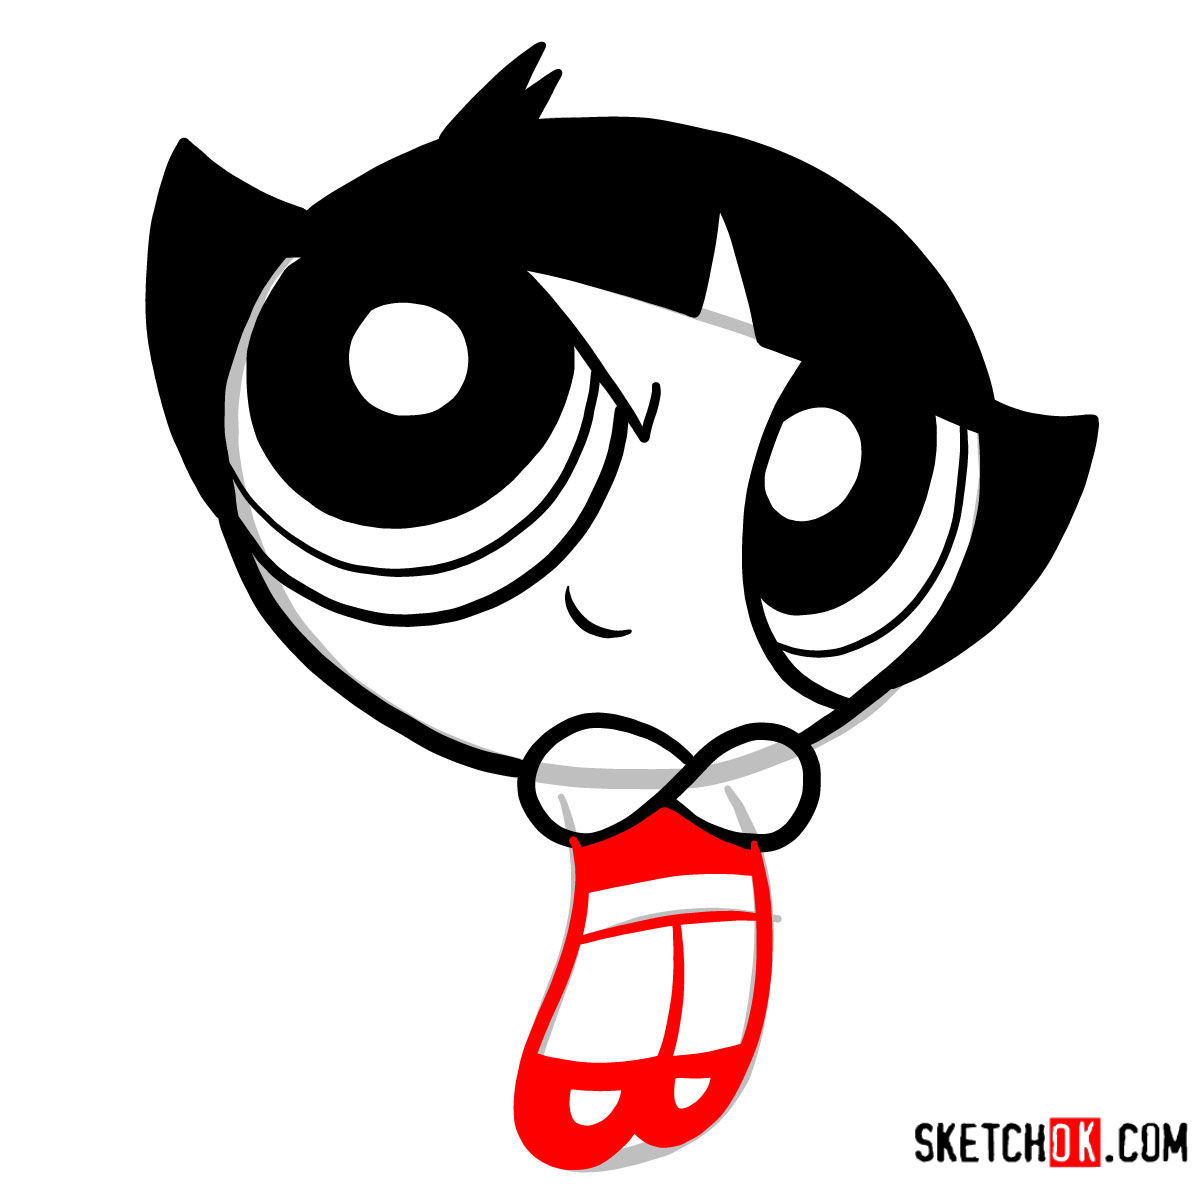 How To Draw A Powerpuff Girl - Electricitytax24